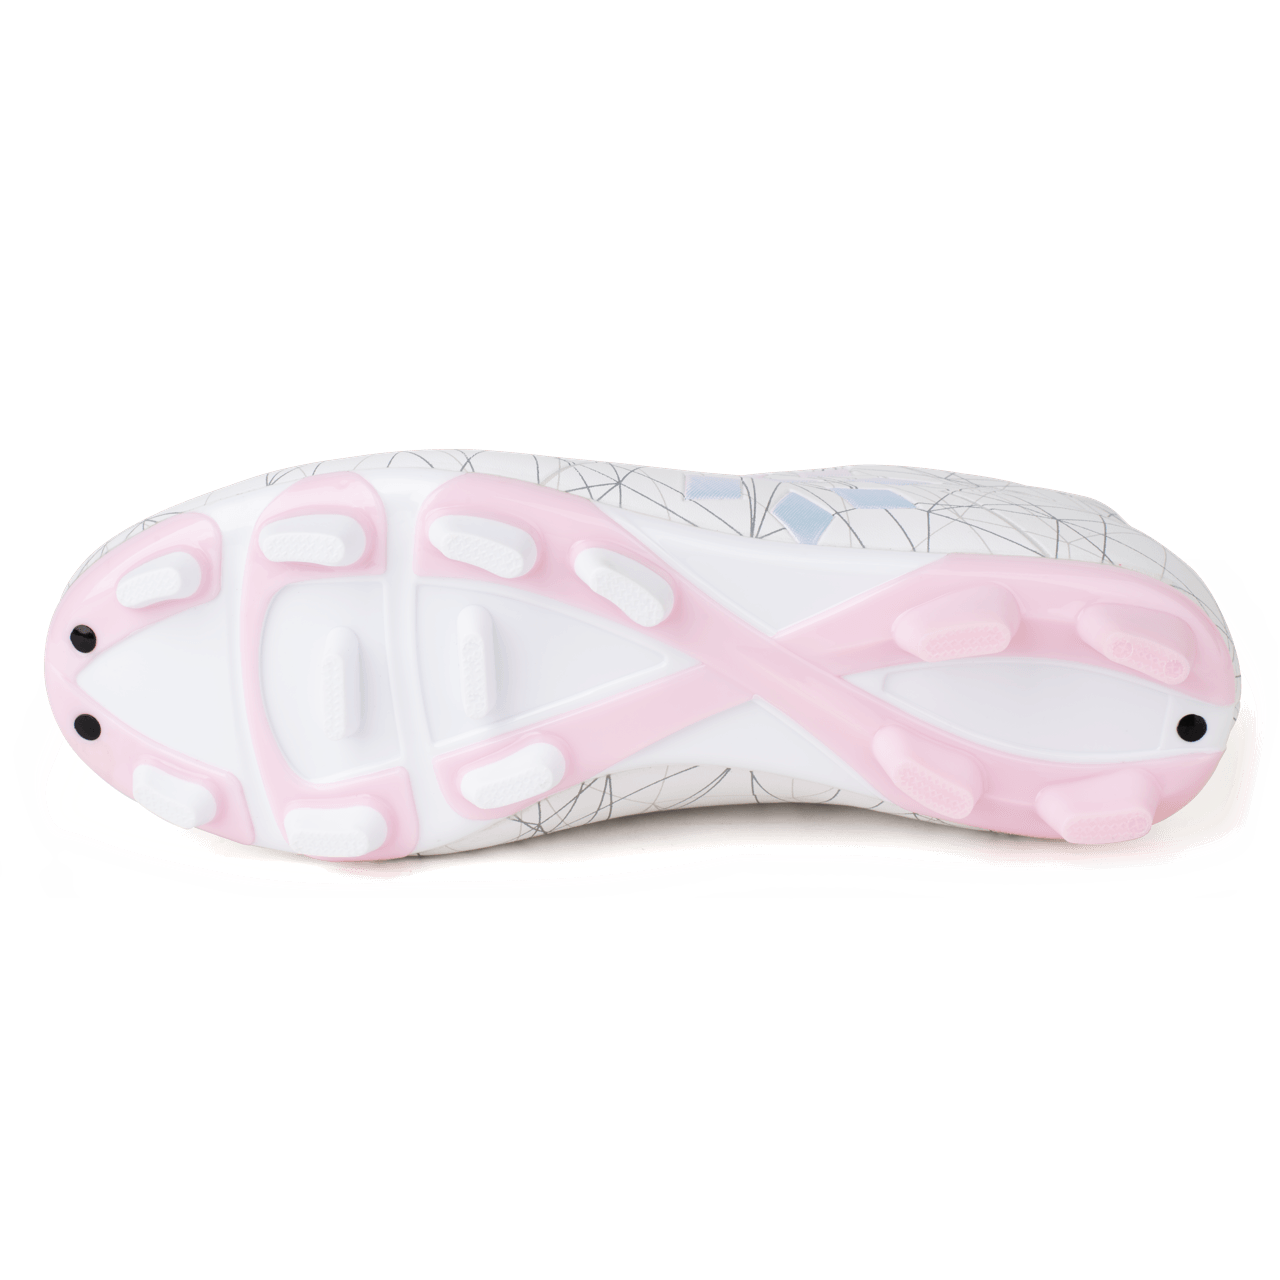 Girls' Soccer Cleat - RIP-IT Sports